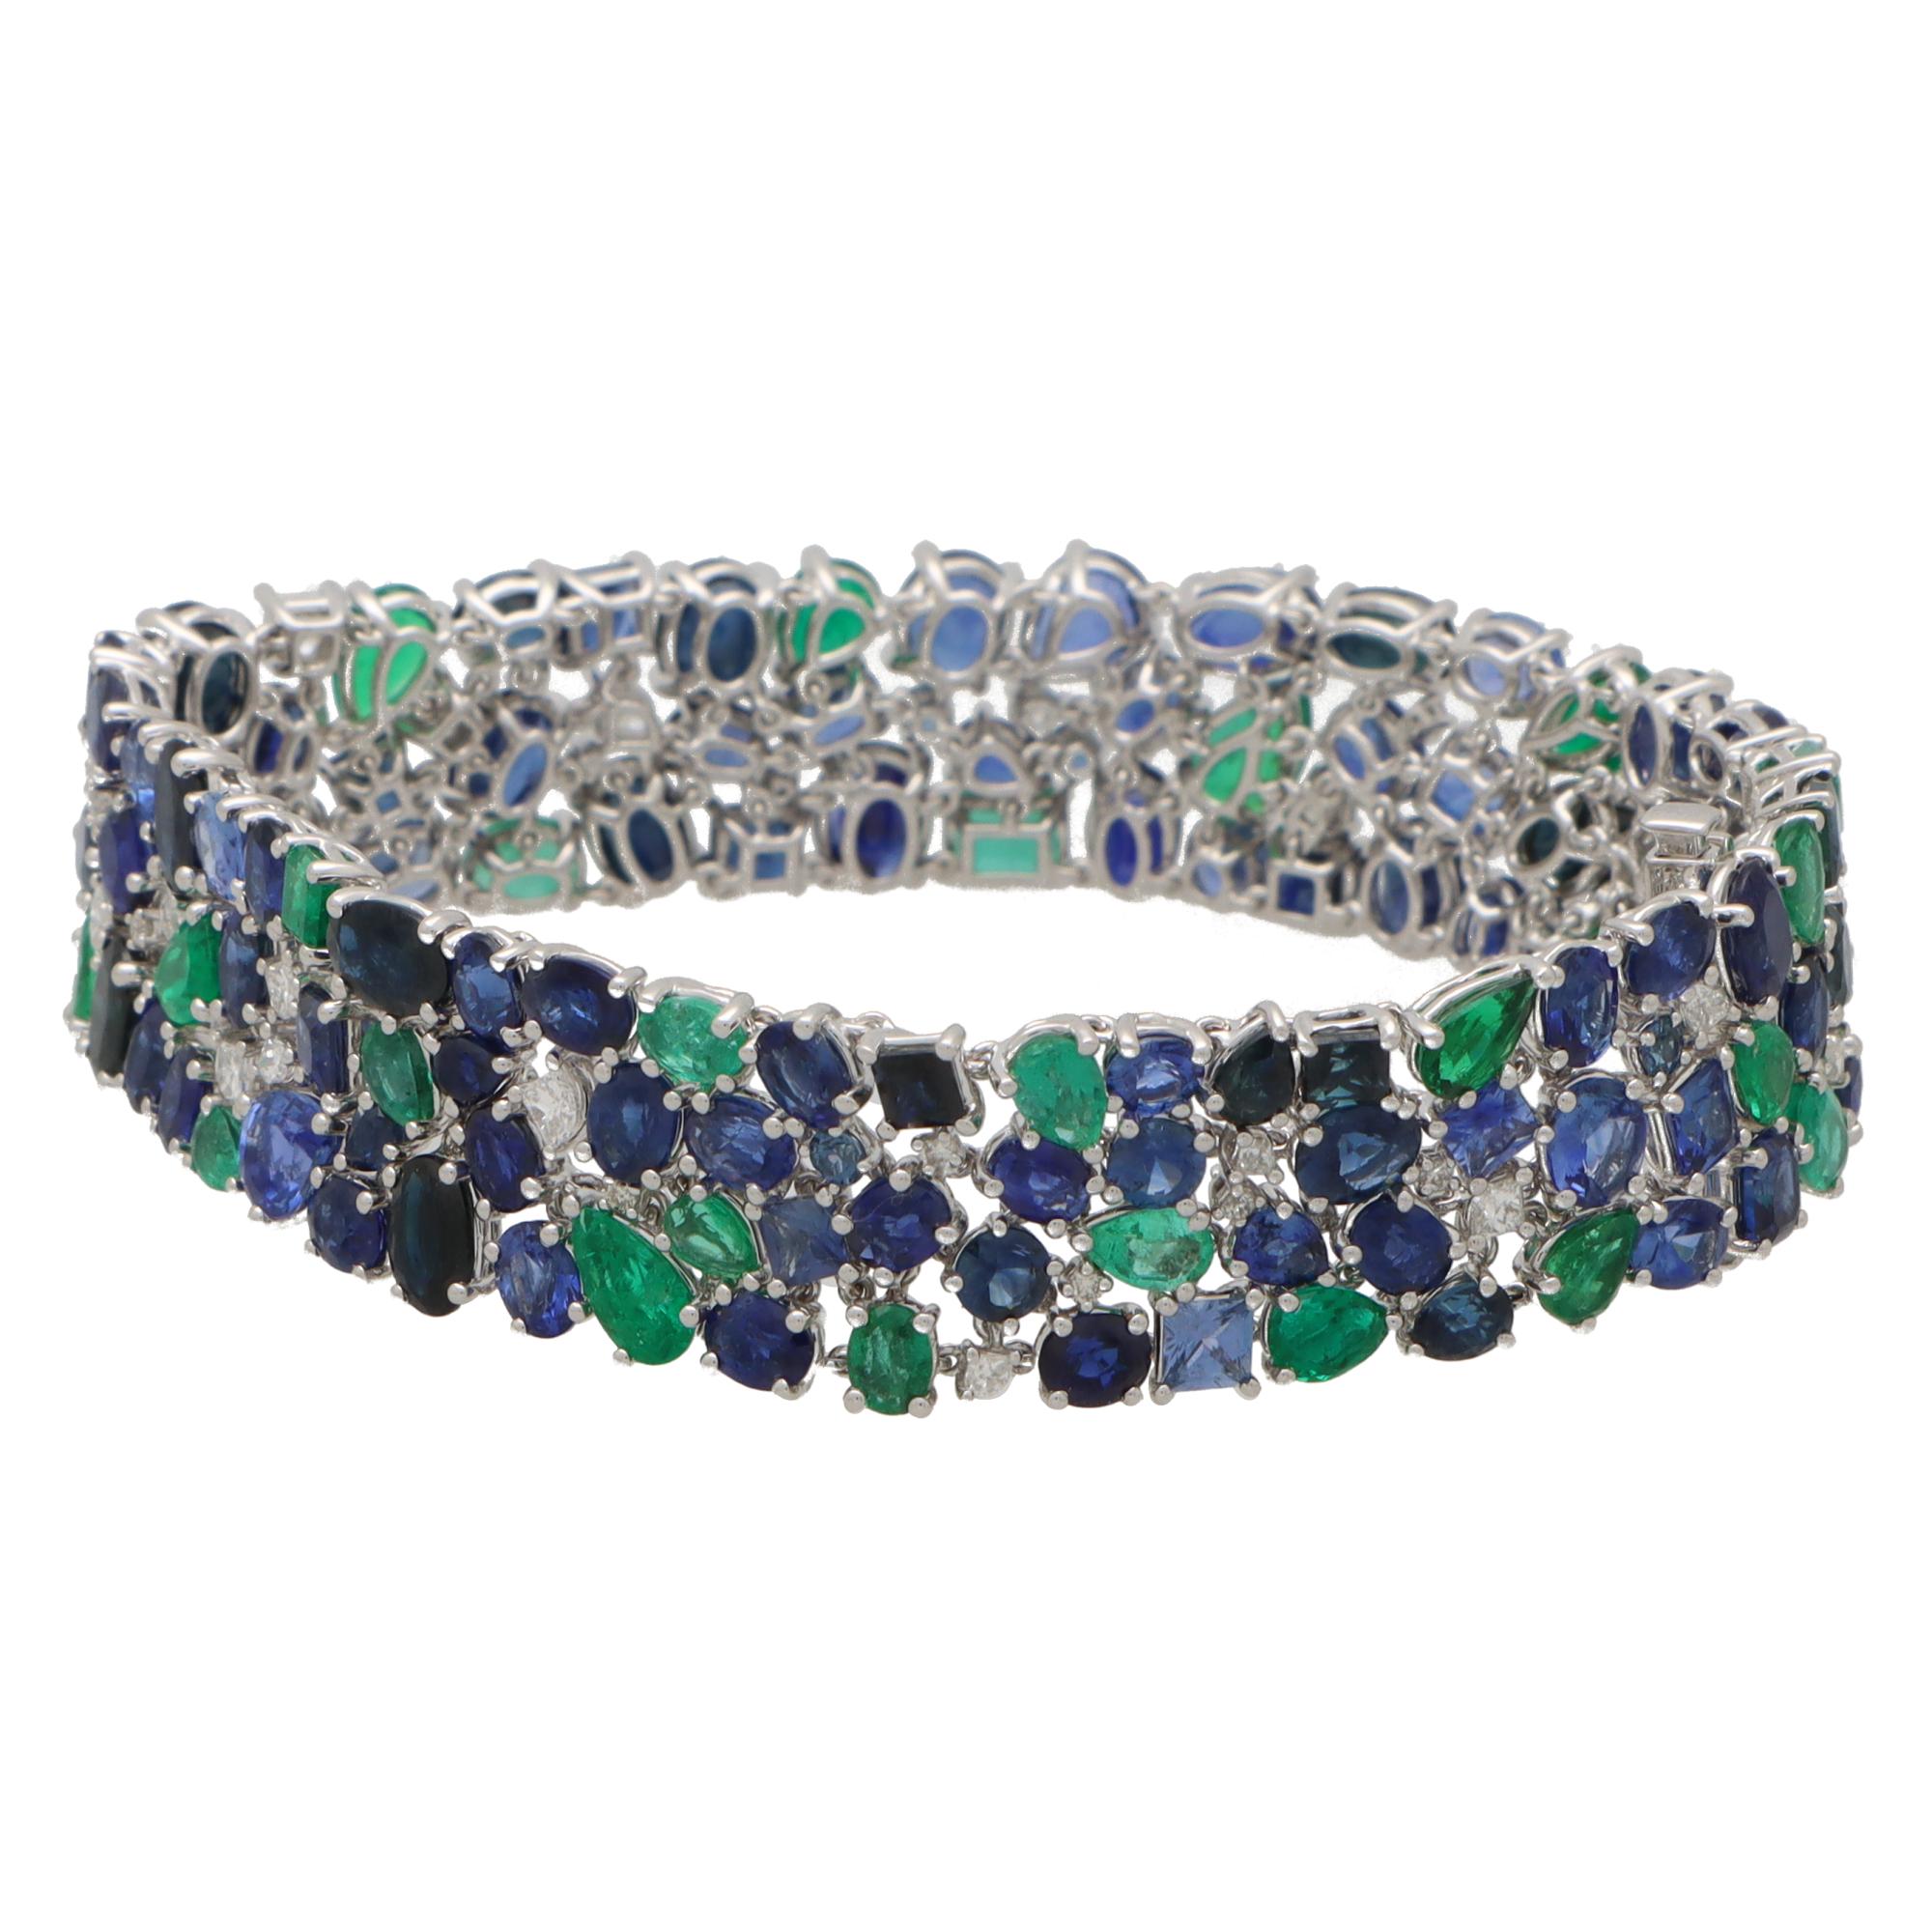 Contemporary Blue Sapphire, Emerald and Diamond Bracelet Set in 18k White Gold In New Condition For Sale In London, GB